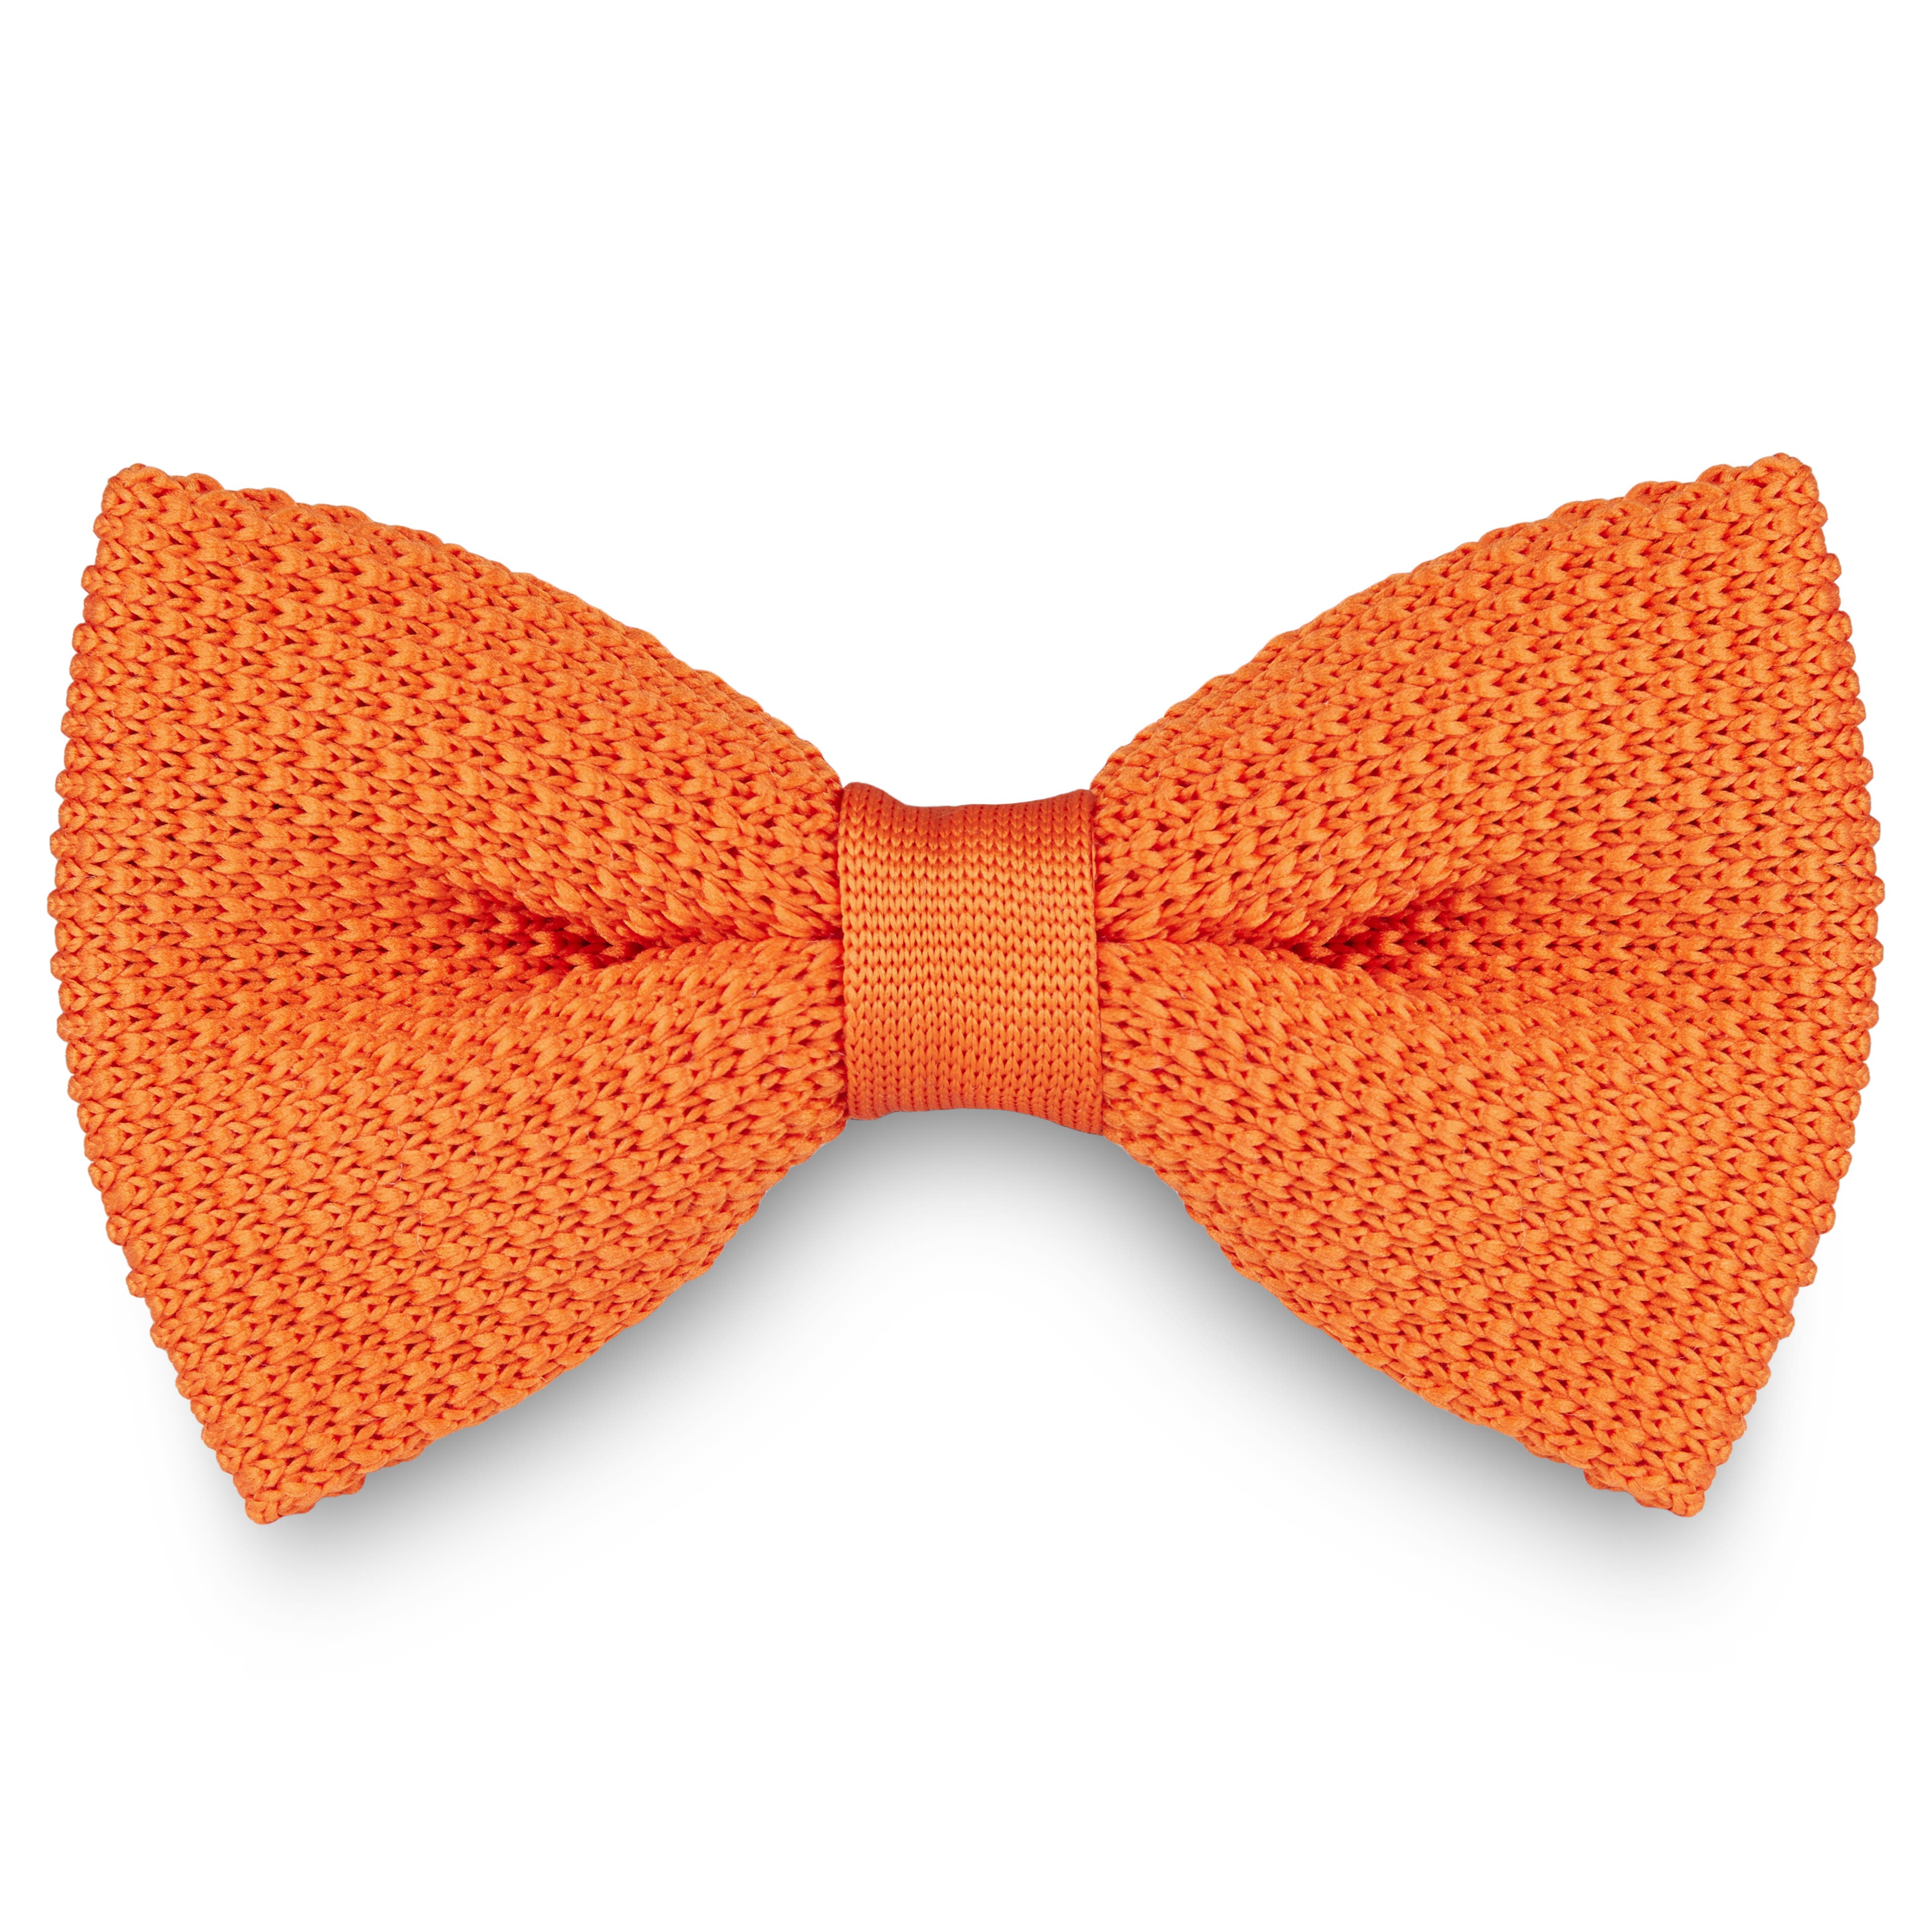 Orange Knitted Pre-Tied Bow Tie